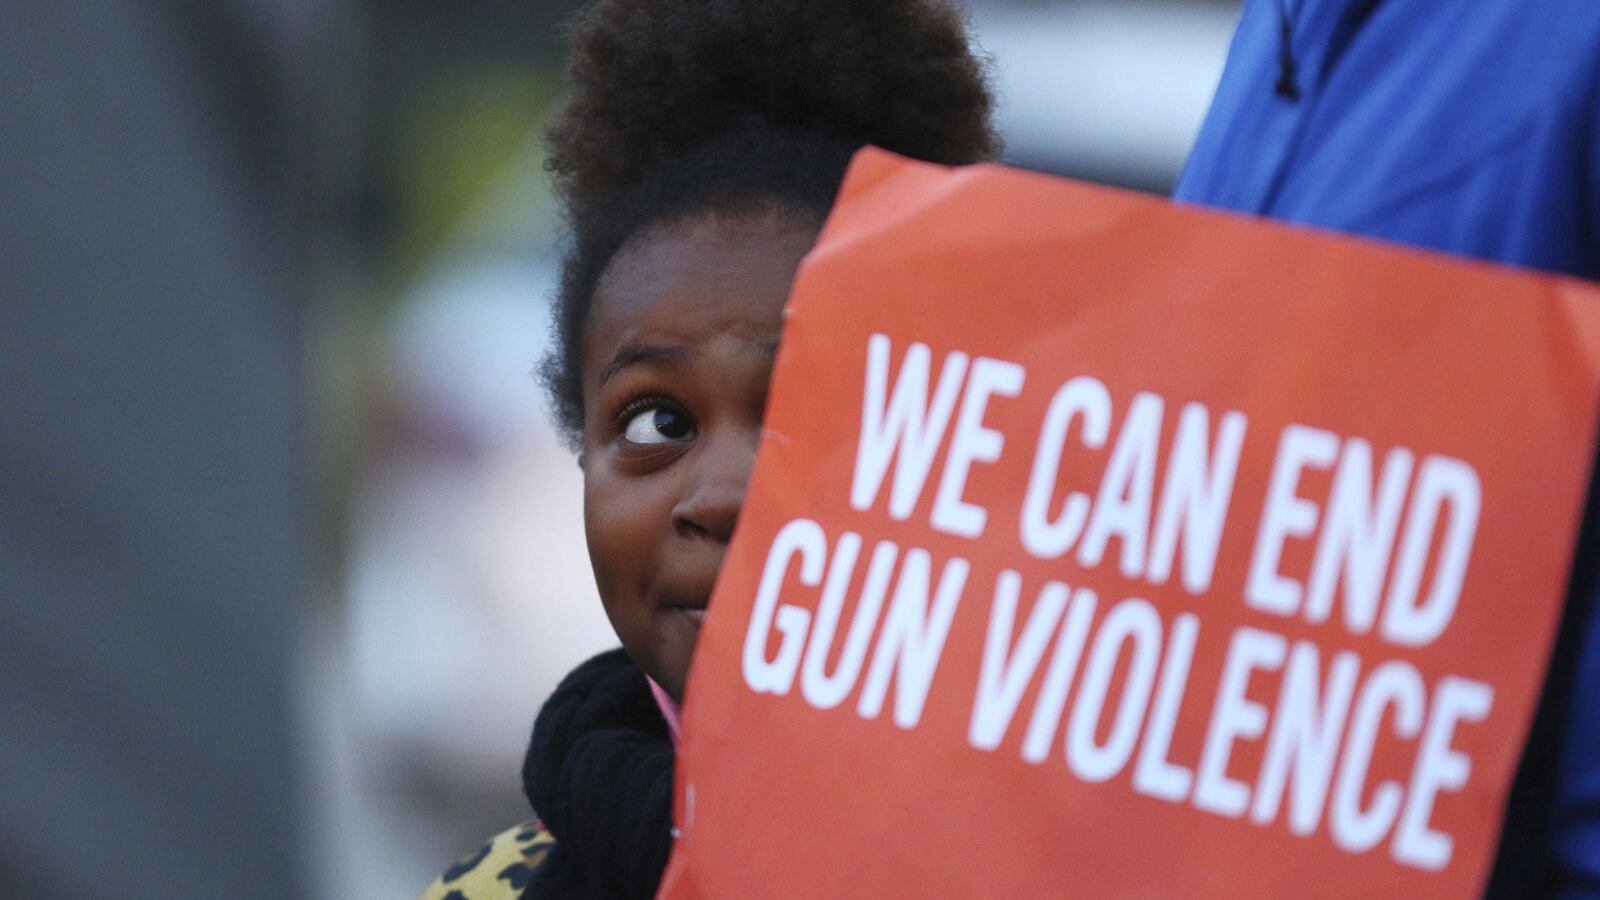 A little girl stands behind a red and white sign that says, “We can end gun violence.” 